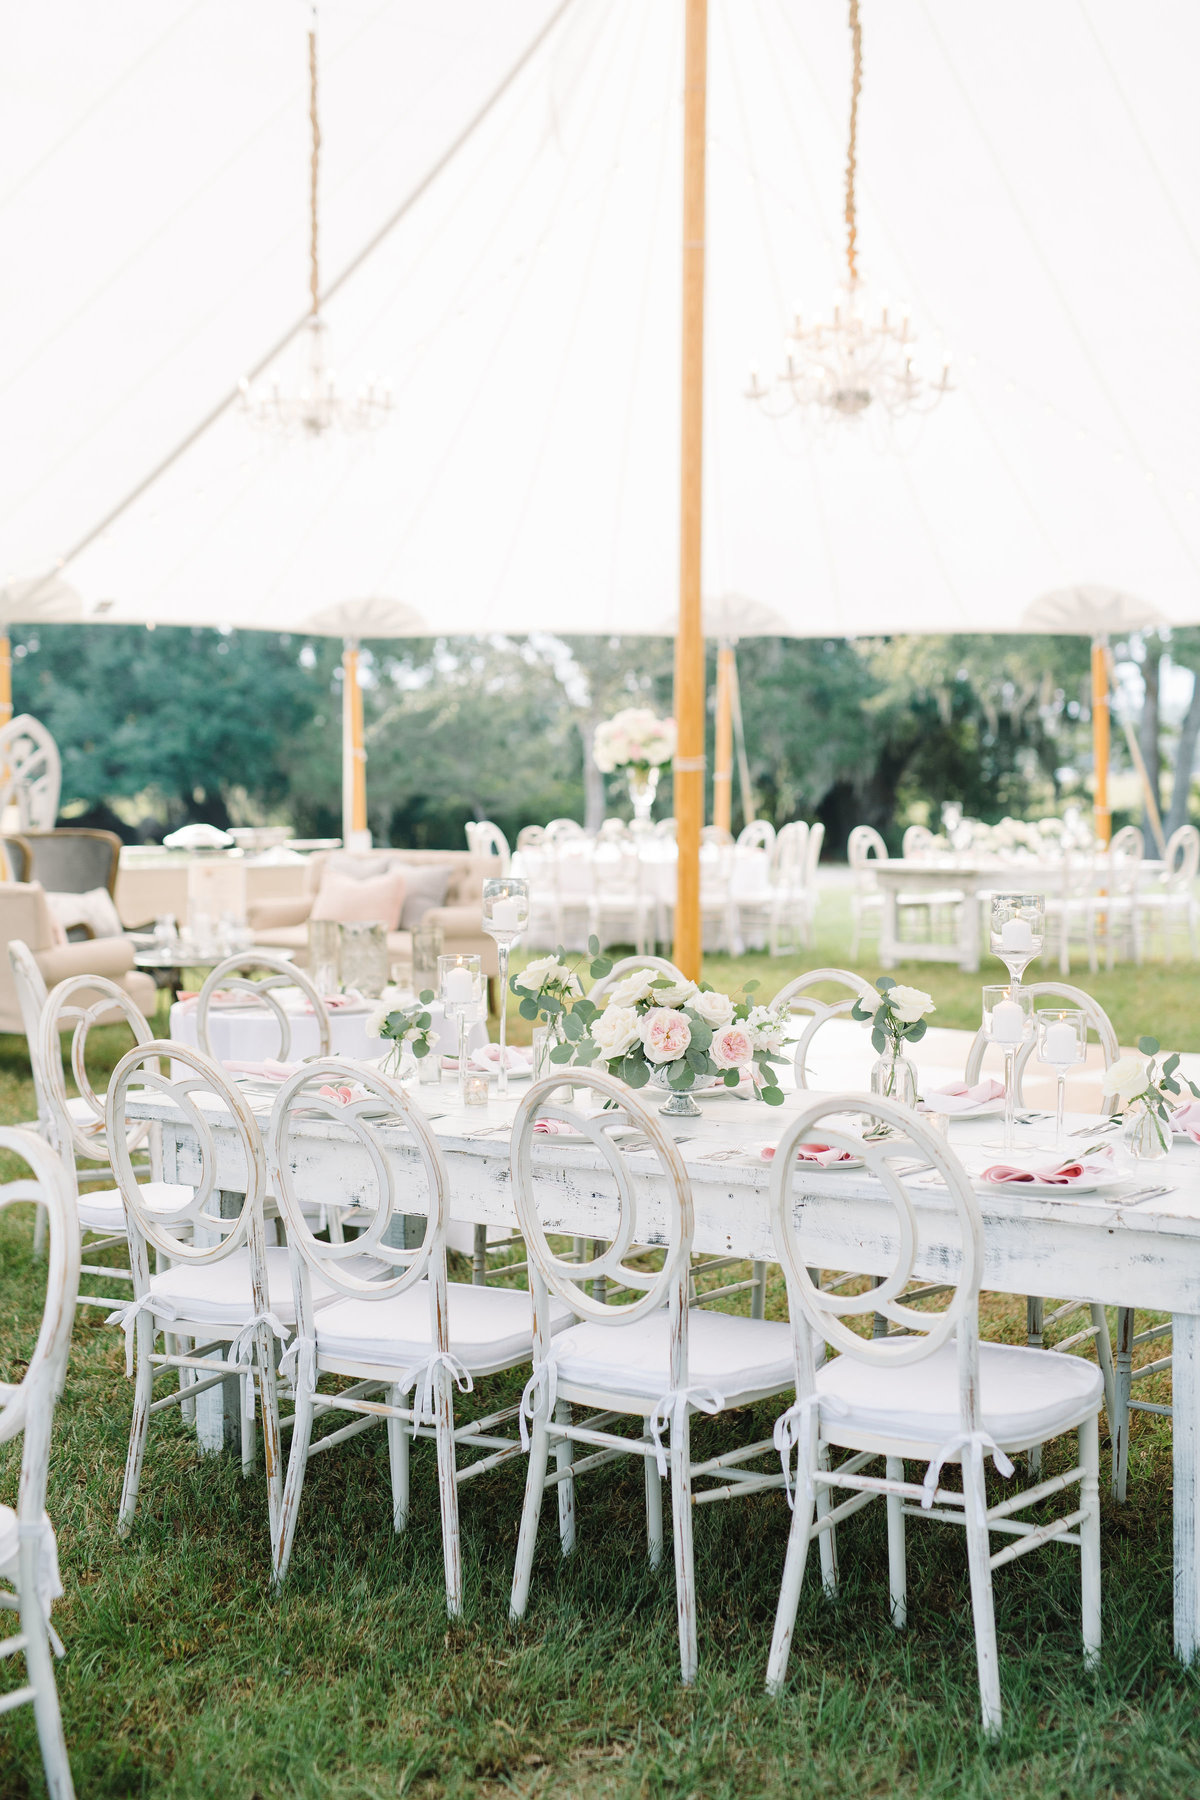 White and Blush Wedding Reception White Chloe Chairs wit Crystal Chandeliers under Sailcloth Tent at Boone Hall